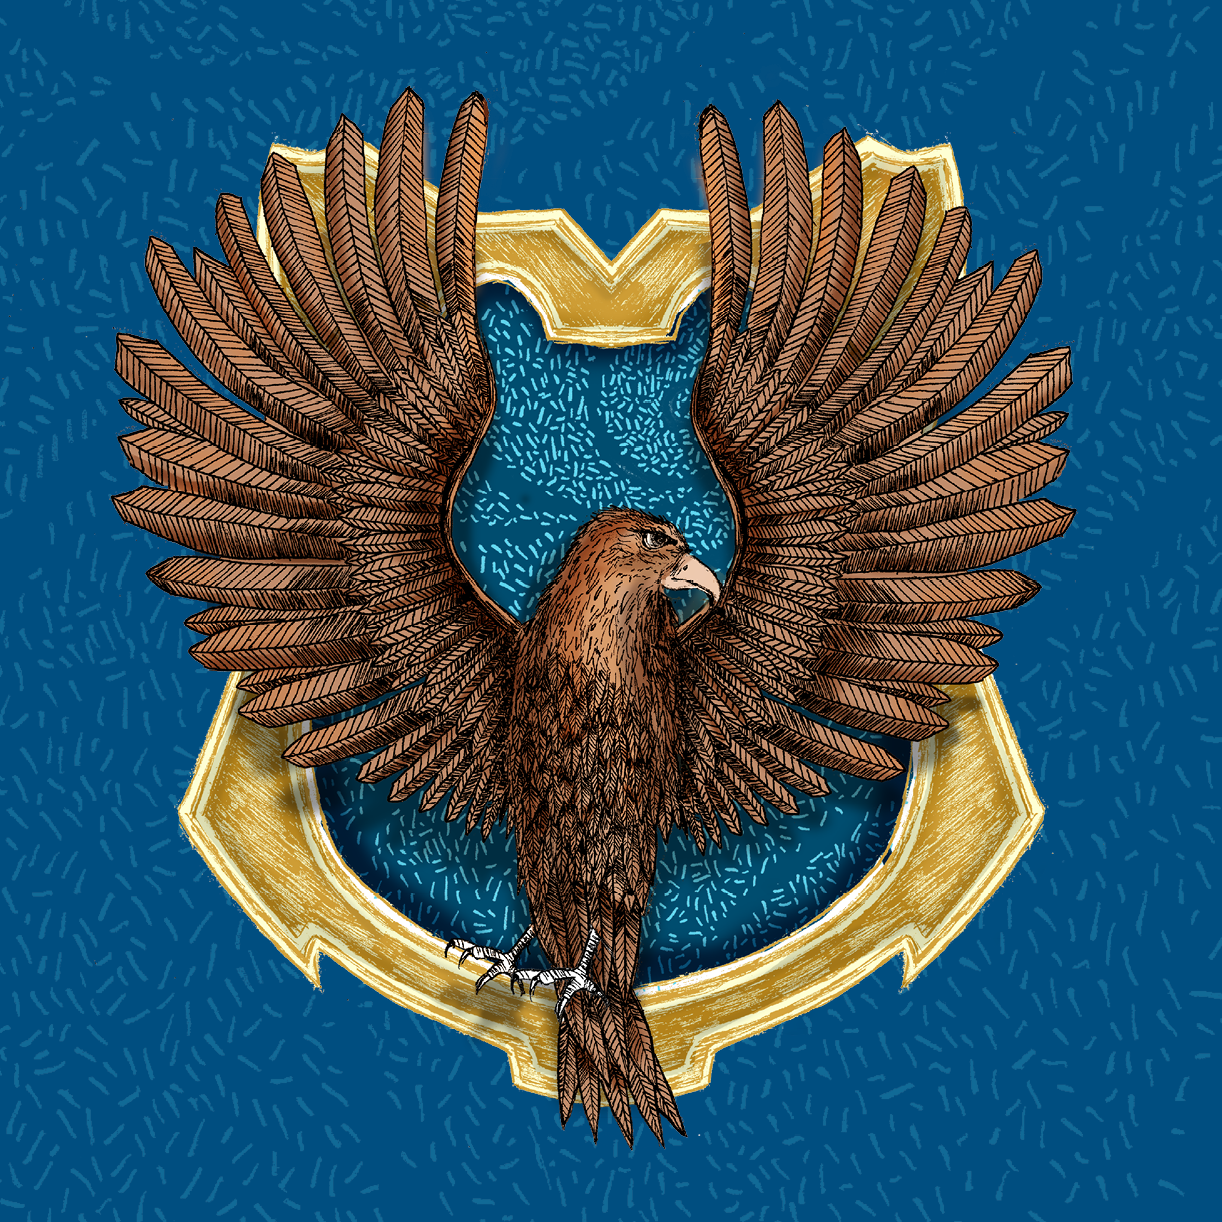 PM_House_Pages_400_x_400_px_FINAL_CREST2.png?w=550&h=550&fit=thumb&f=center&q=85